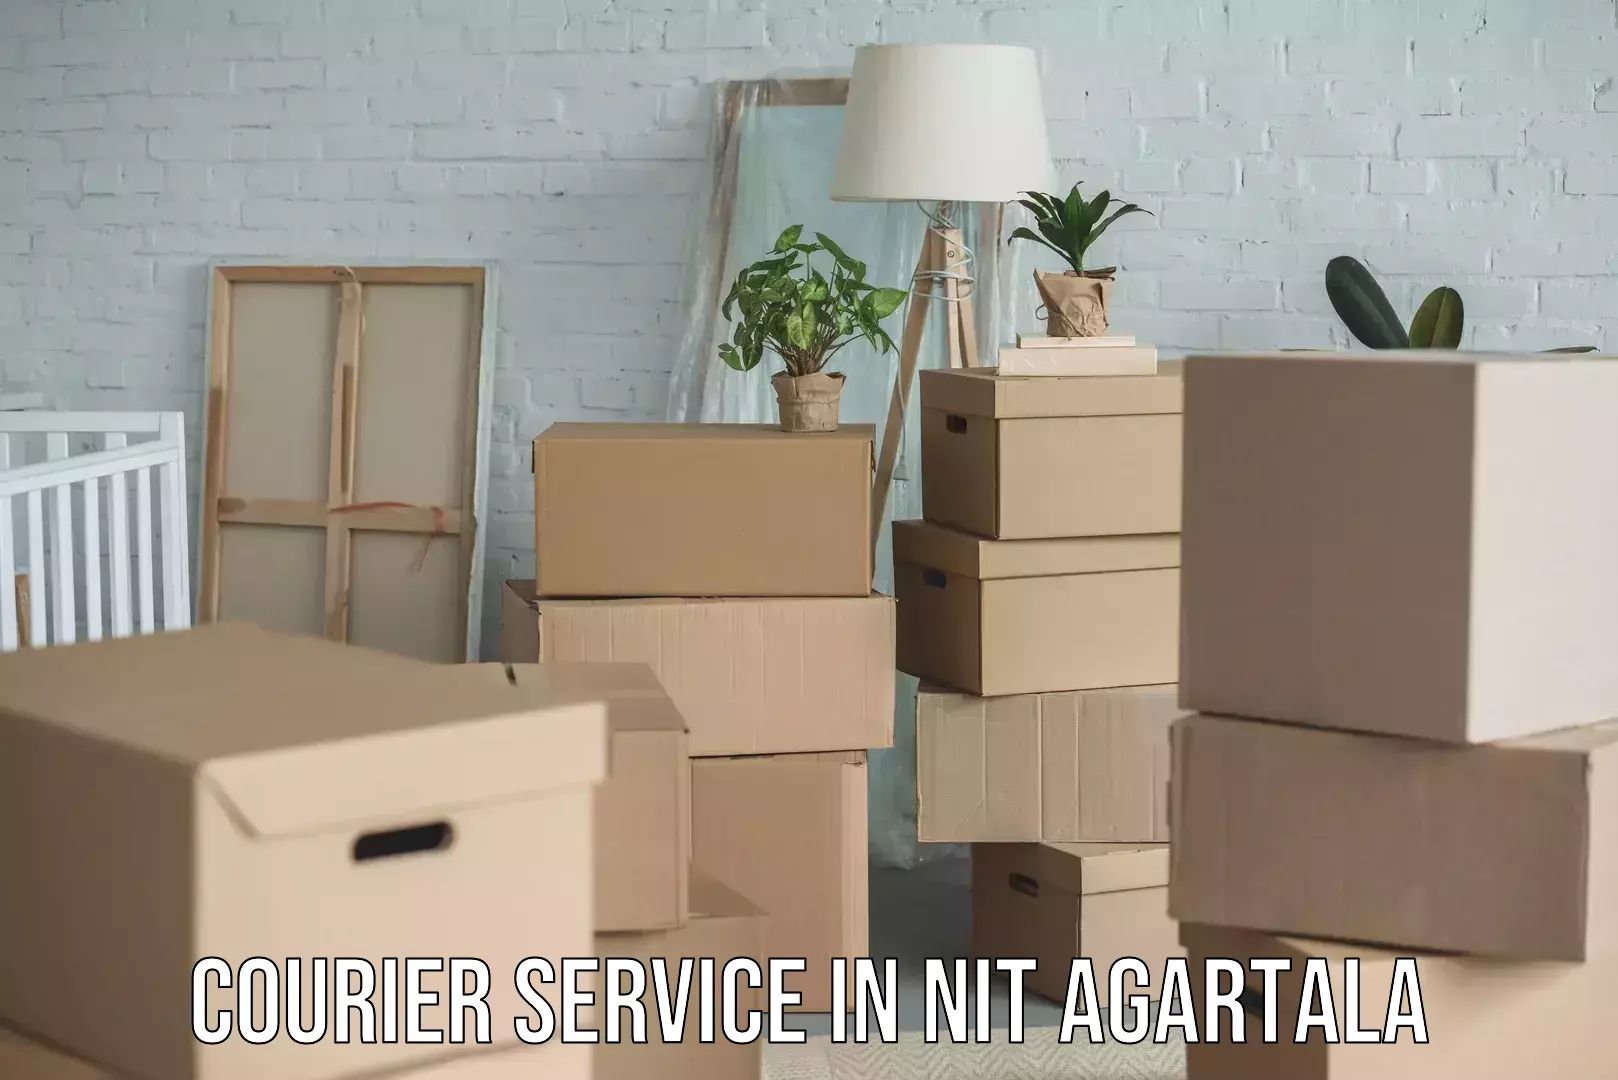 Parcel handling and care in NIT Agartala